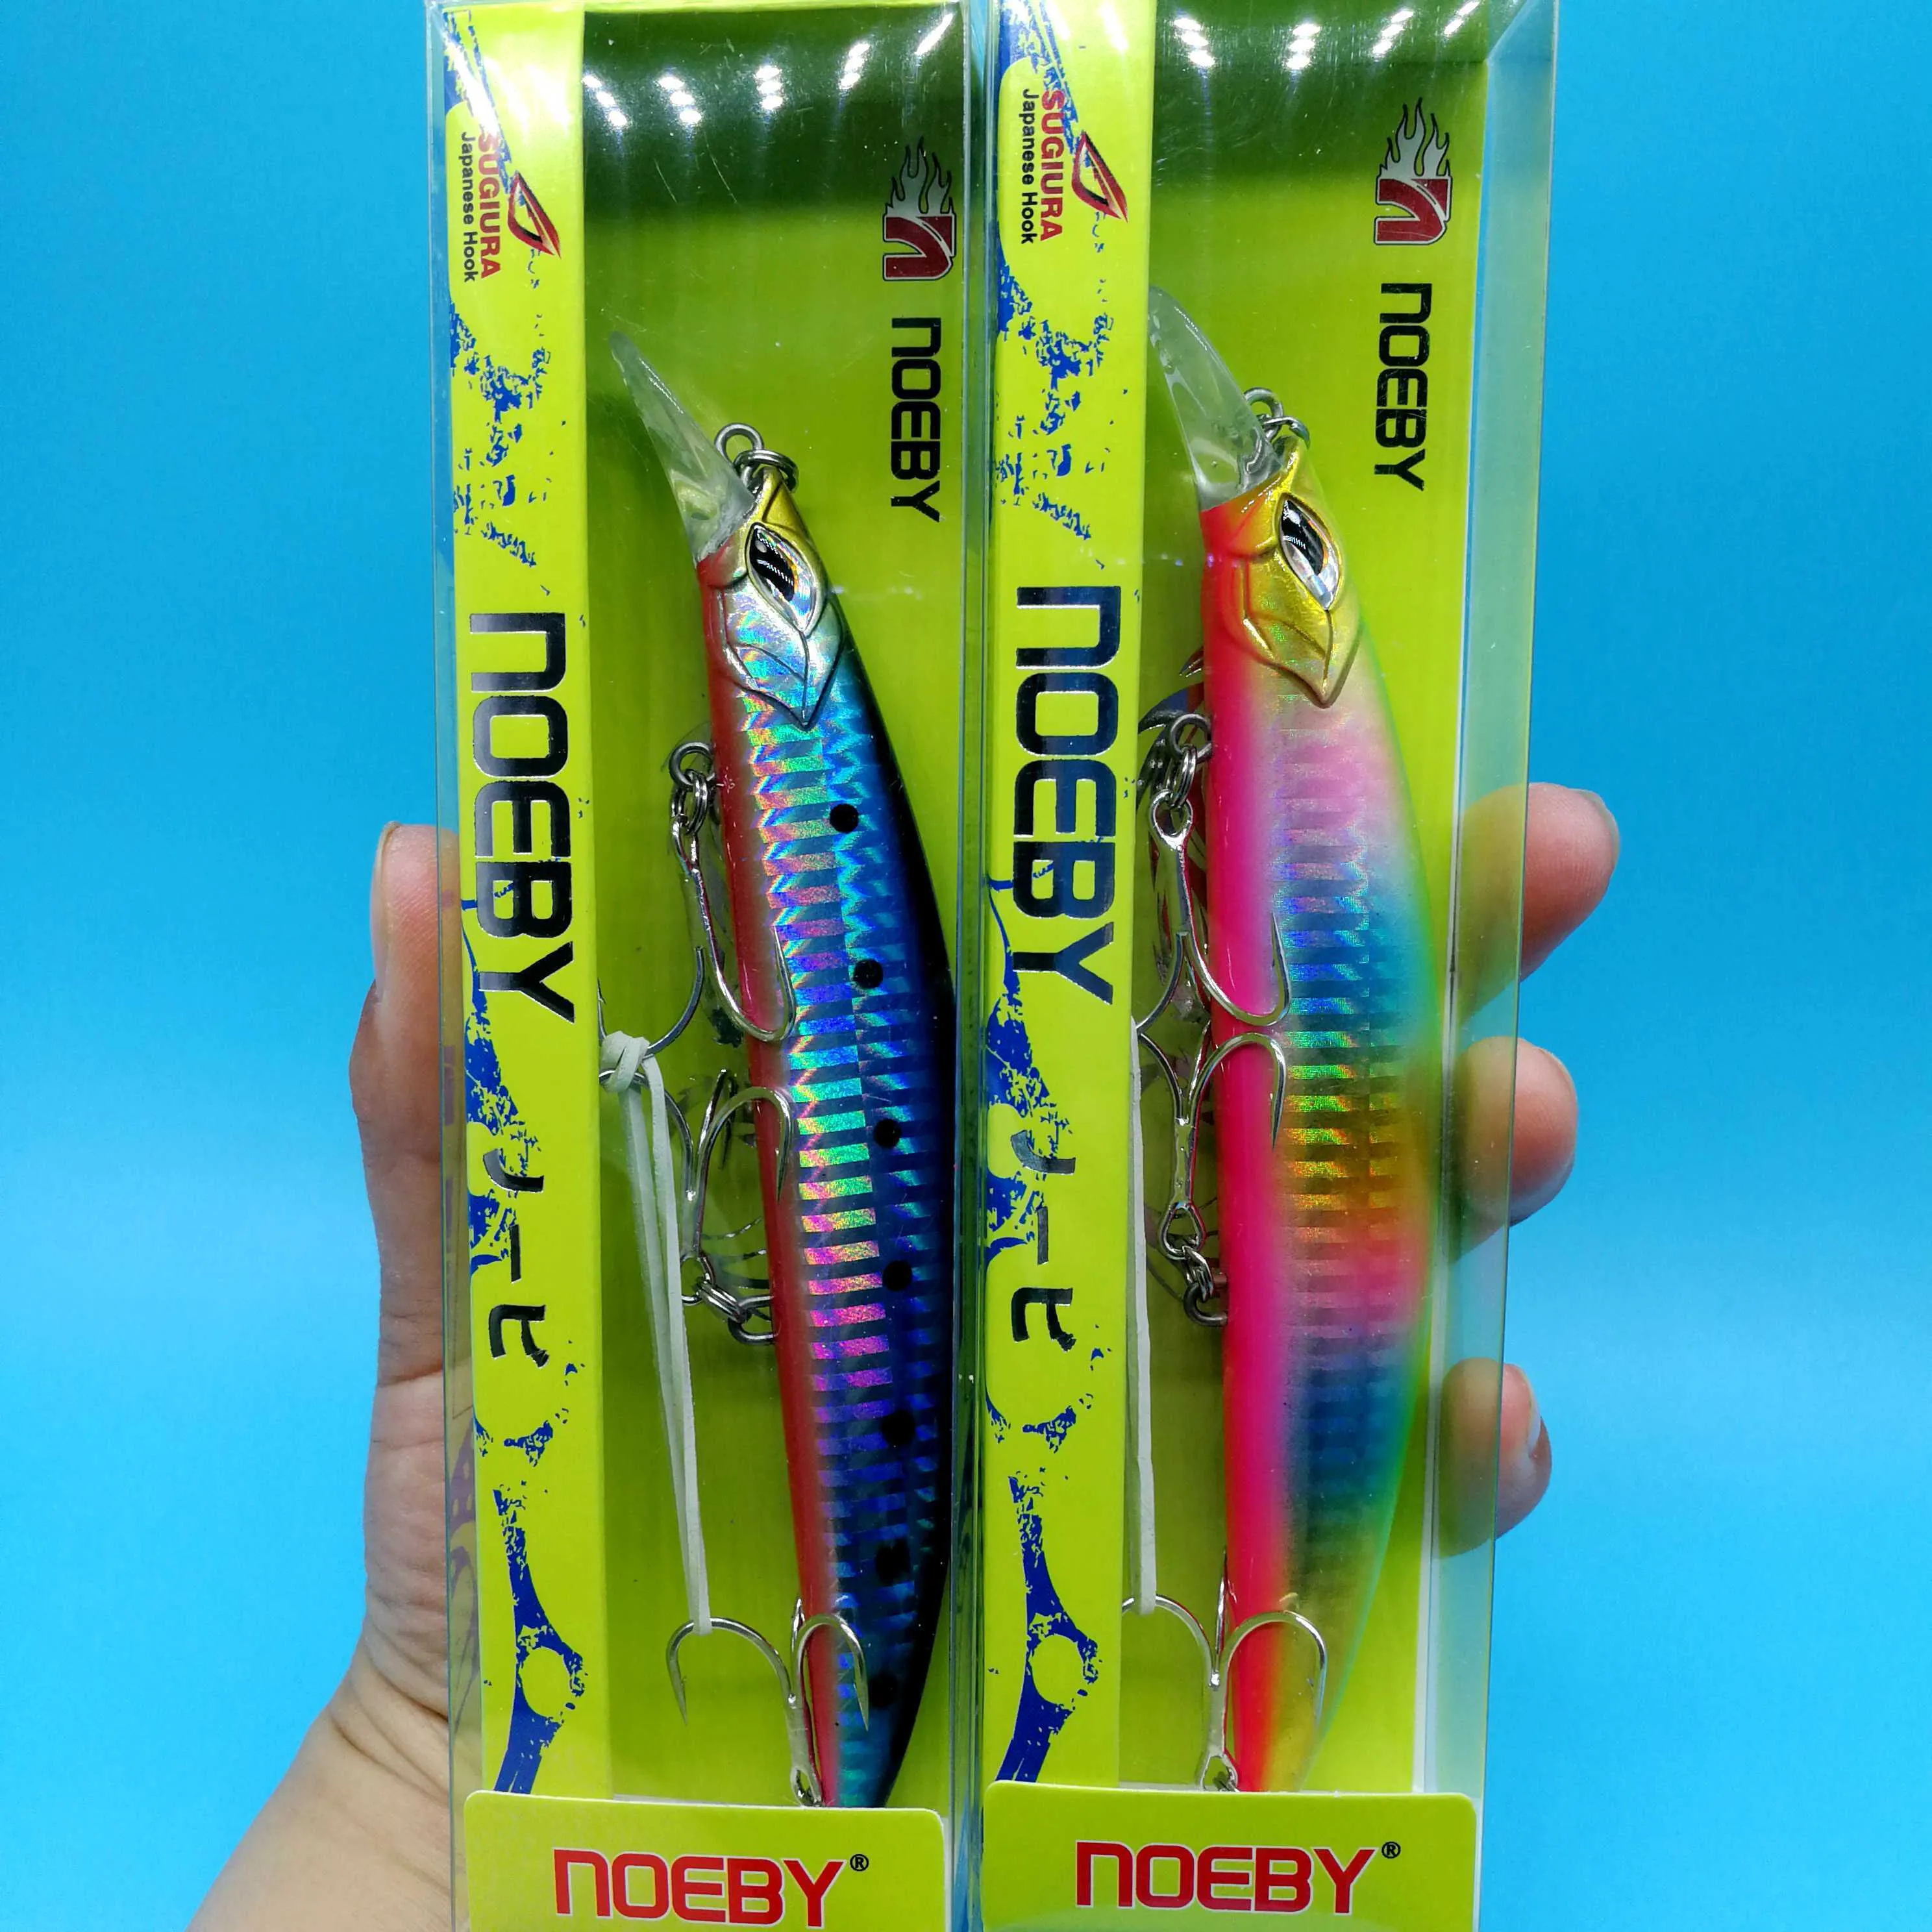 NOEBY 2019 Floating Minnow Rainbow Trout Lures Set 23g, 130mm, 0 1.5m Depth,  Wobbler Hard Bait For Saltwater Fishing Tackle T20274g From Fed26, $21.7